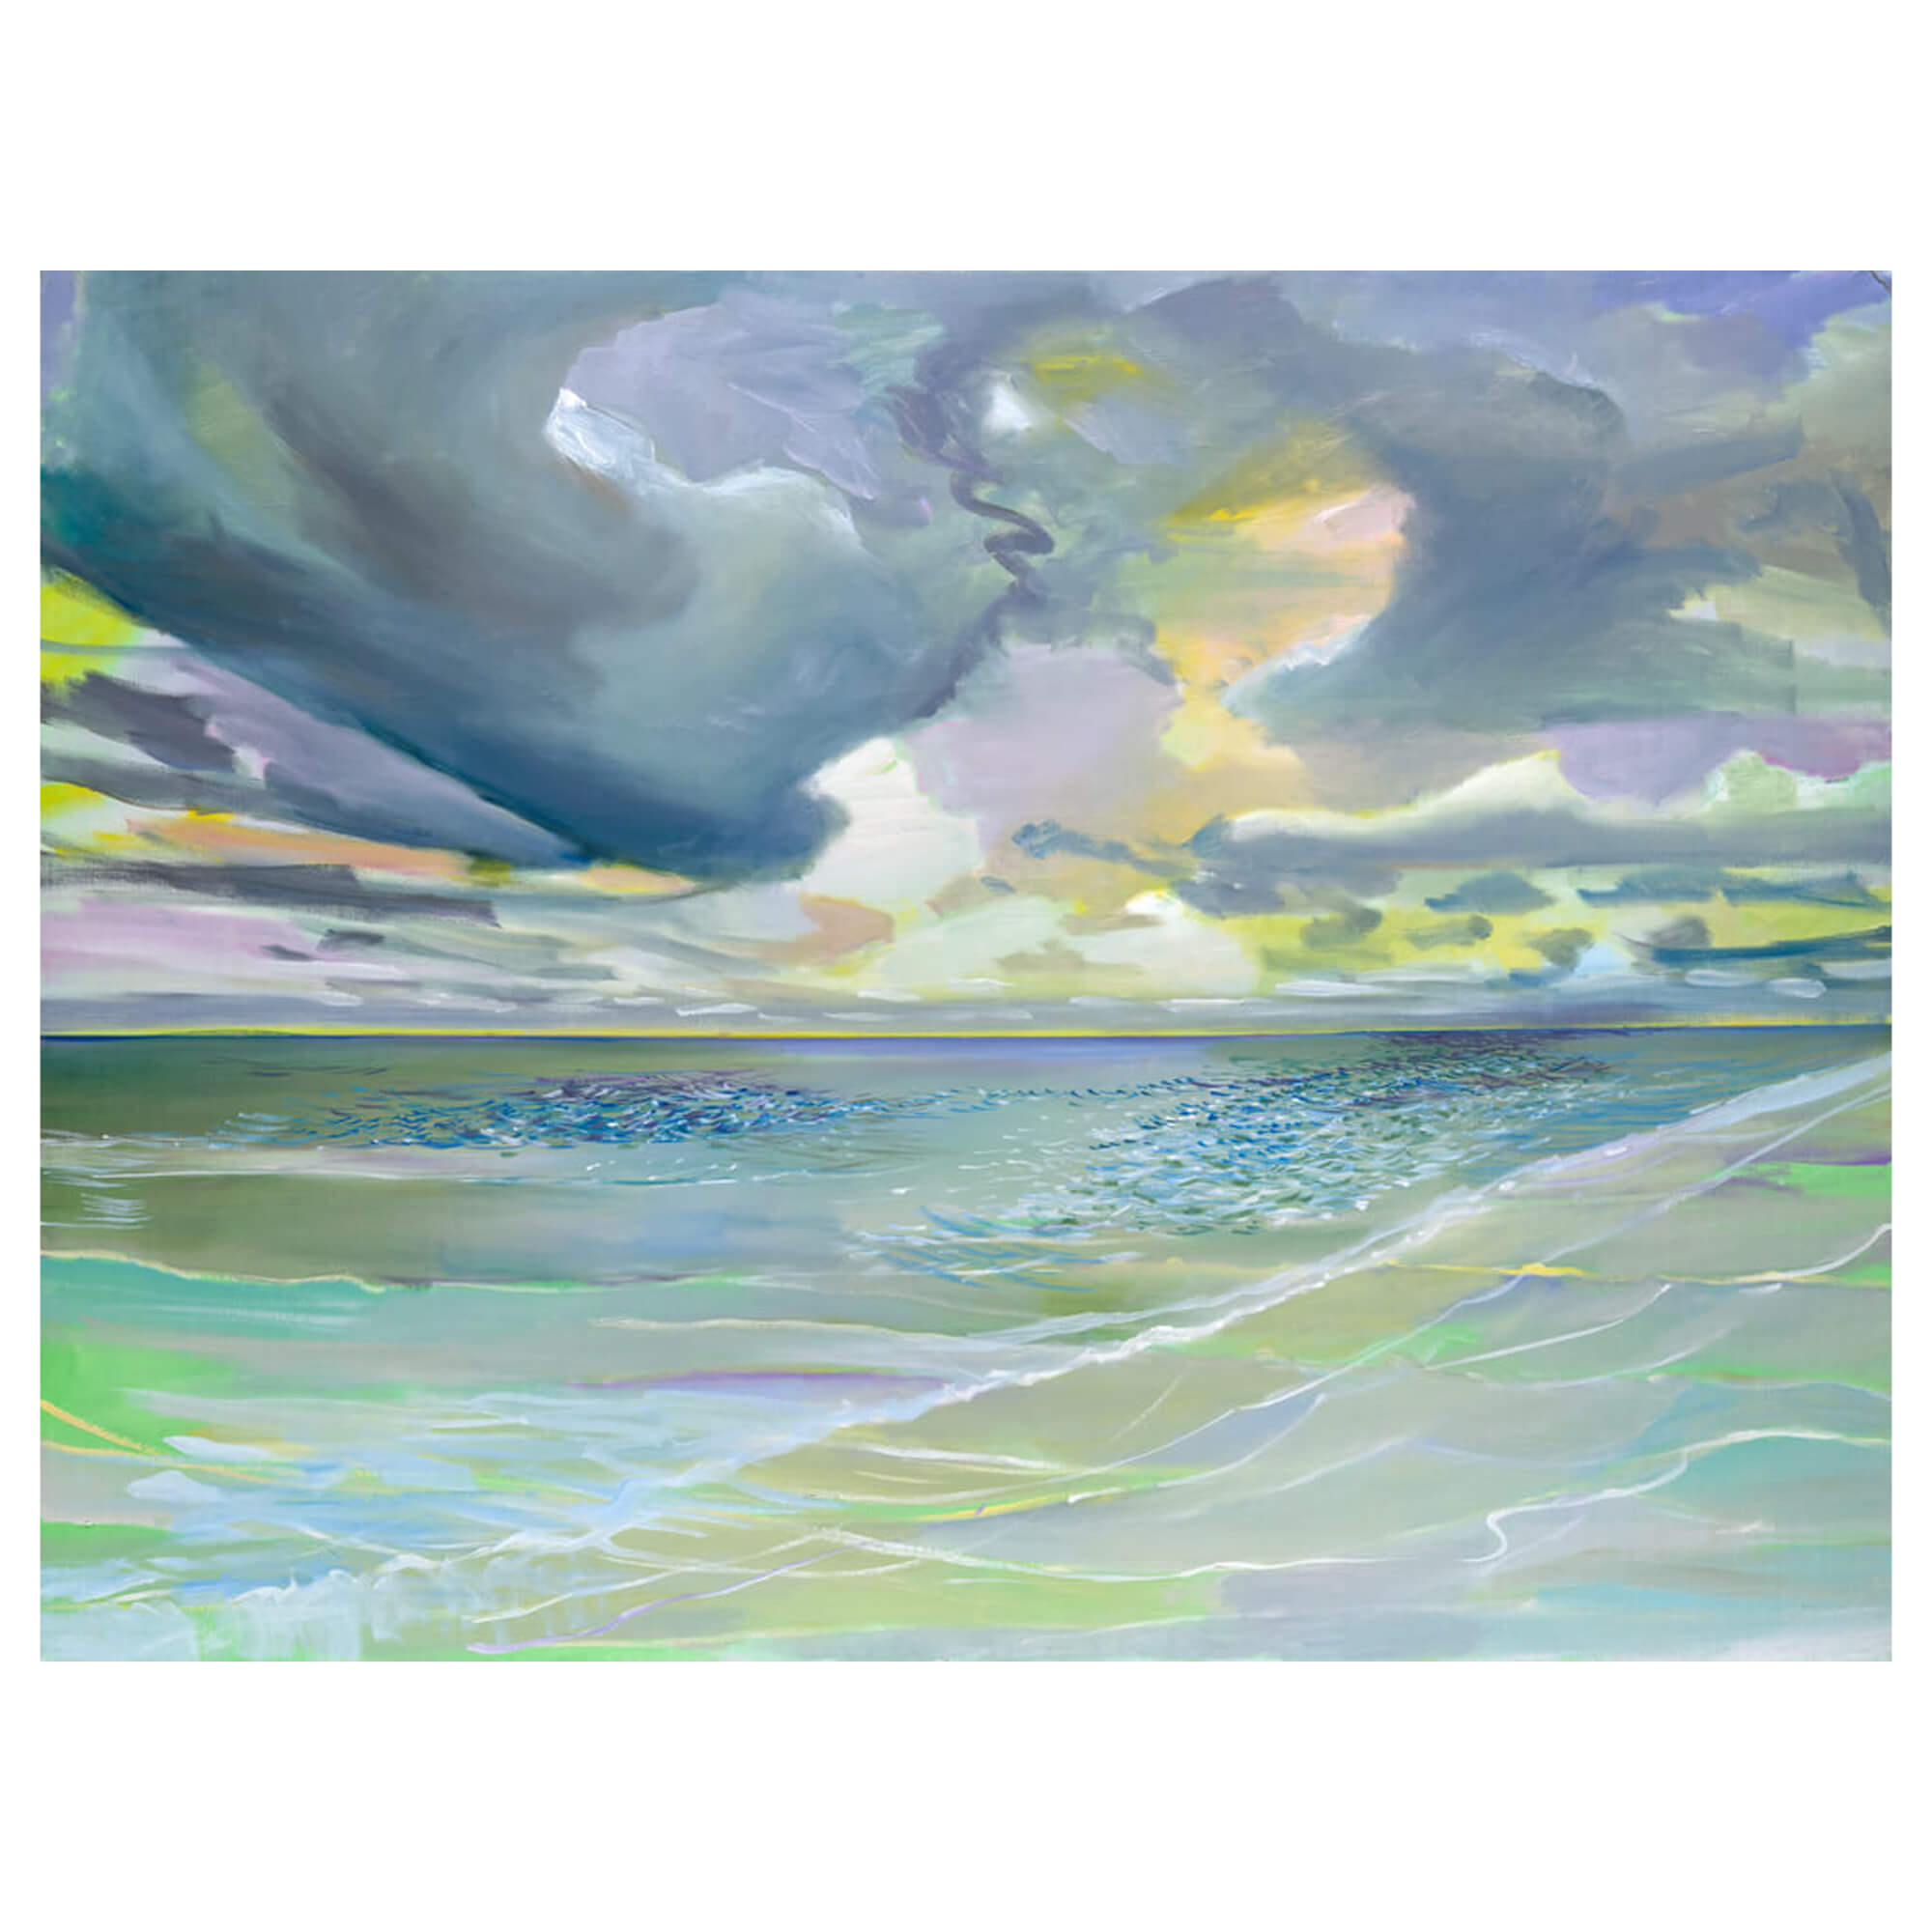  A matted art print of a serene seascape with the water reflecting yellow, green, blue, and teal hues by Hawaii artist Saumolia Puapuaga